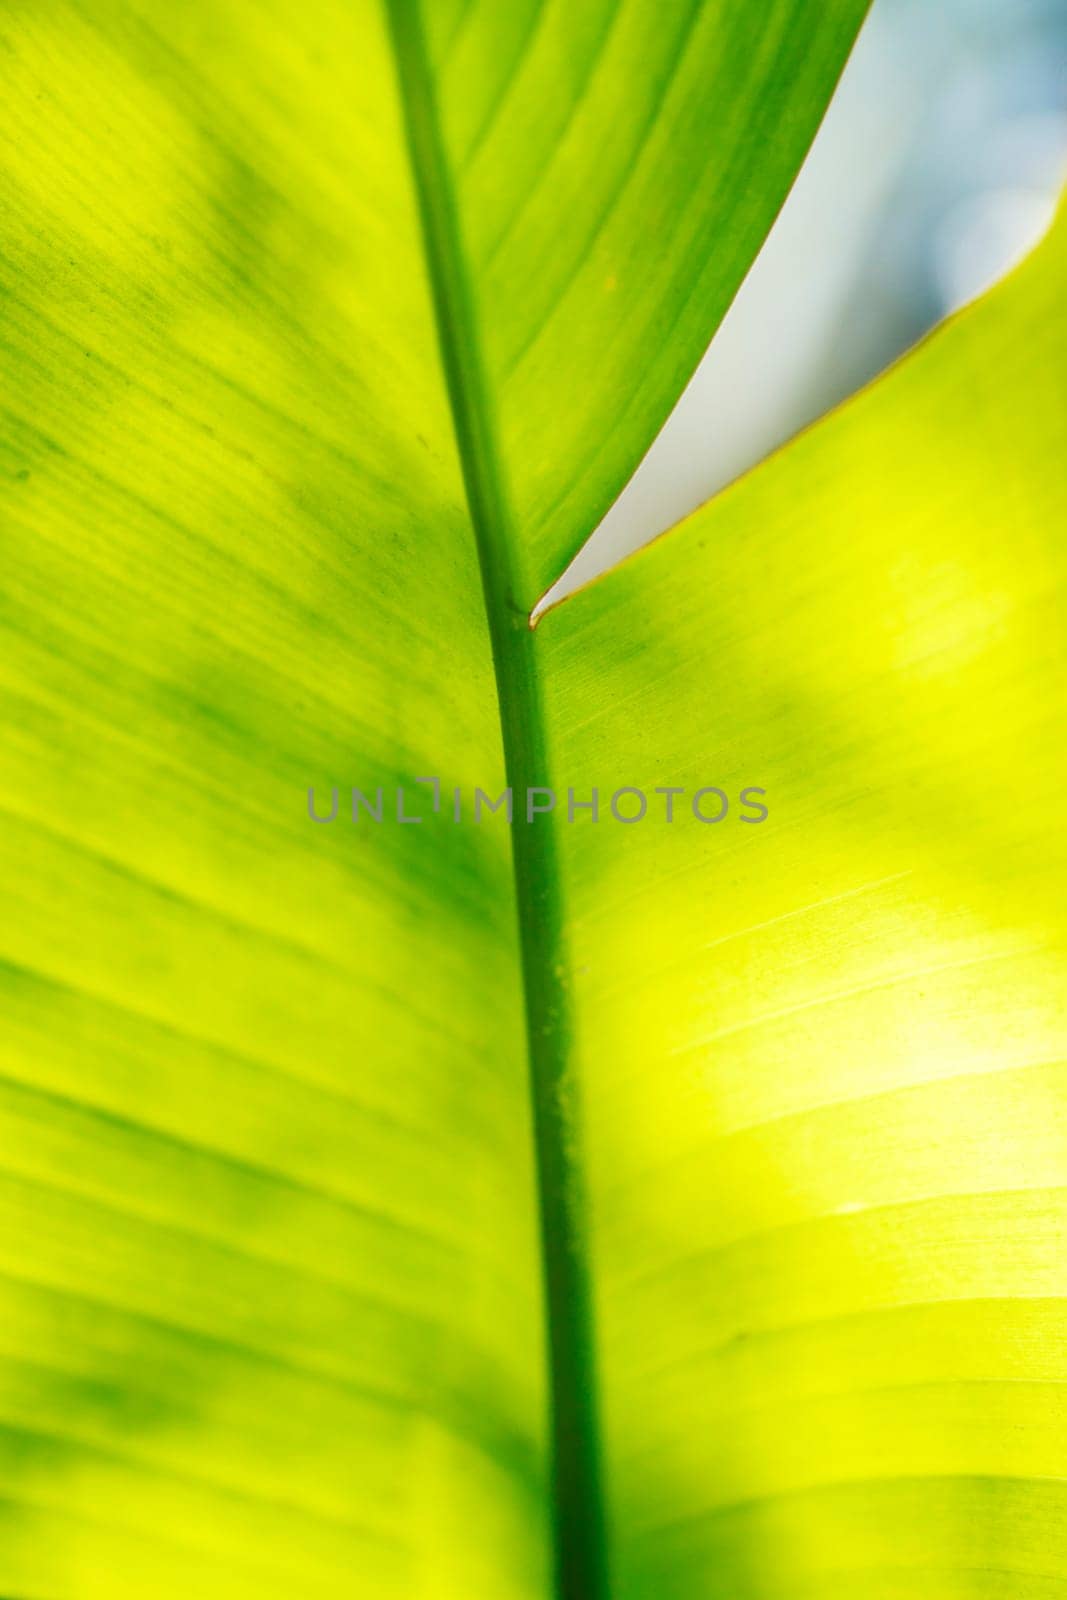 Banana palm tree leaf in sunlight close-up